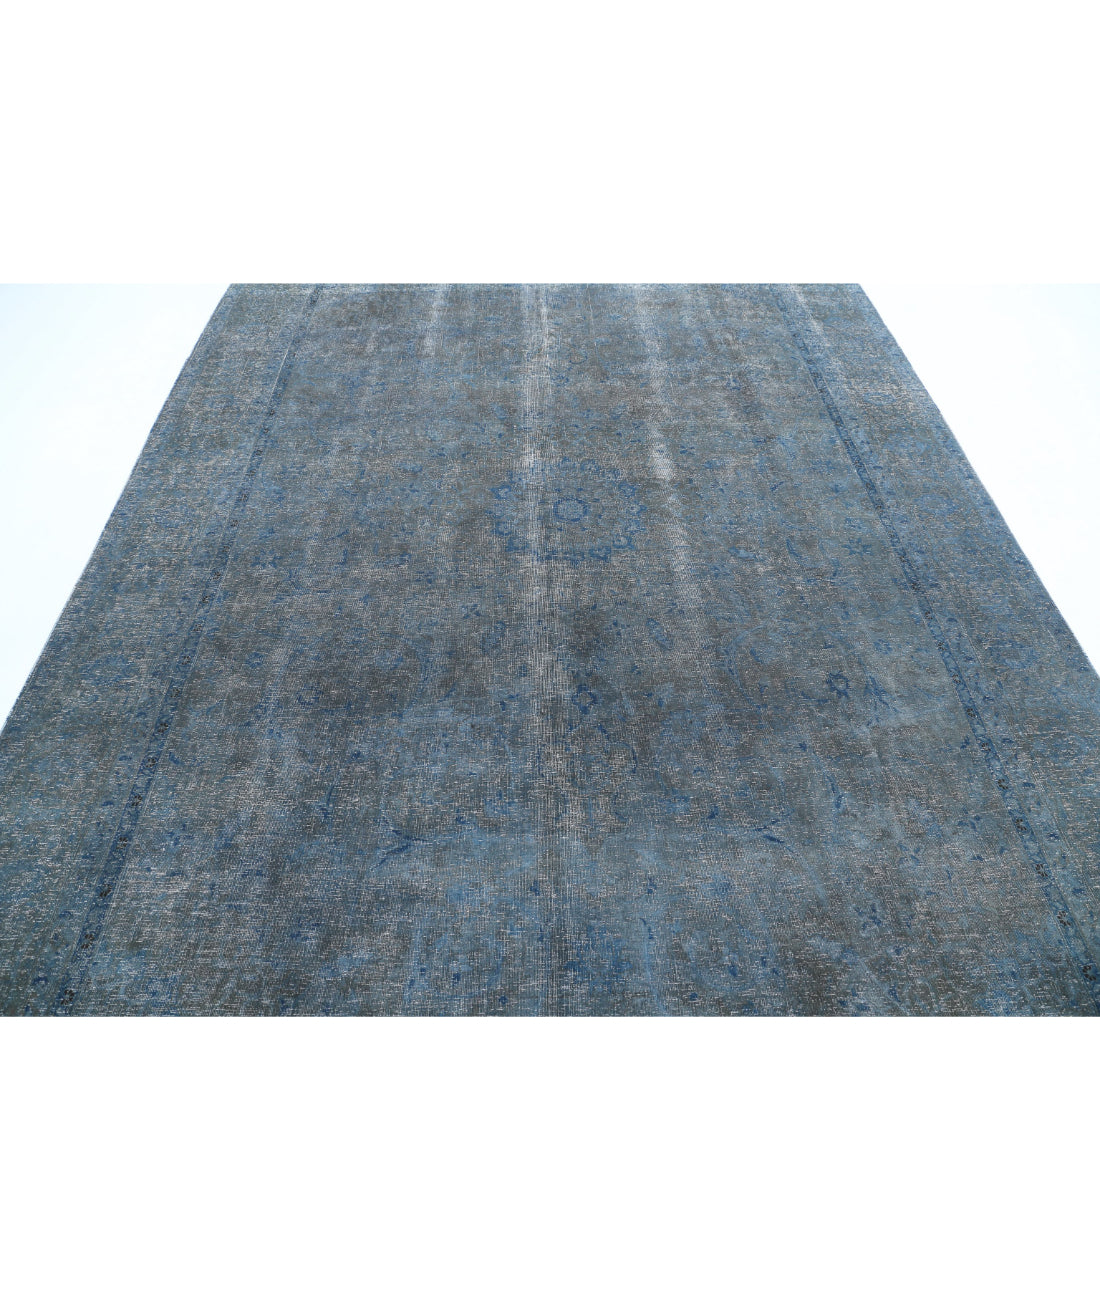 Hand Knotted Transitional Overdye Mashad Wool Rug - 7'8'' x 10'11'' 7'8'' x 10'11'' (230 X 328) / Blue / Charcoal